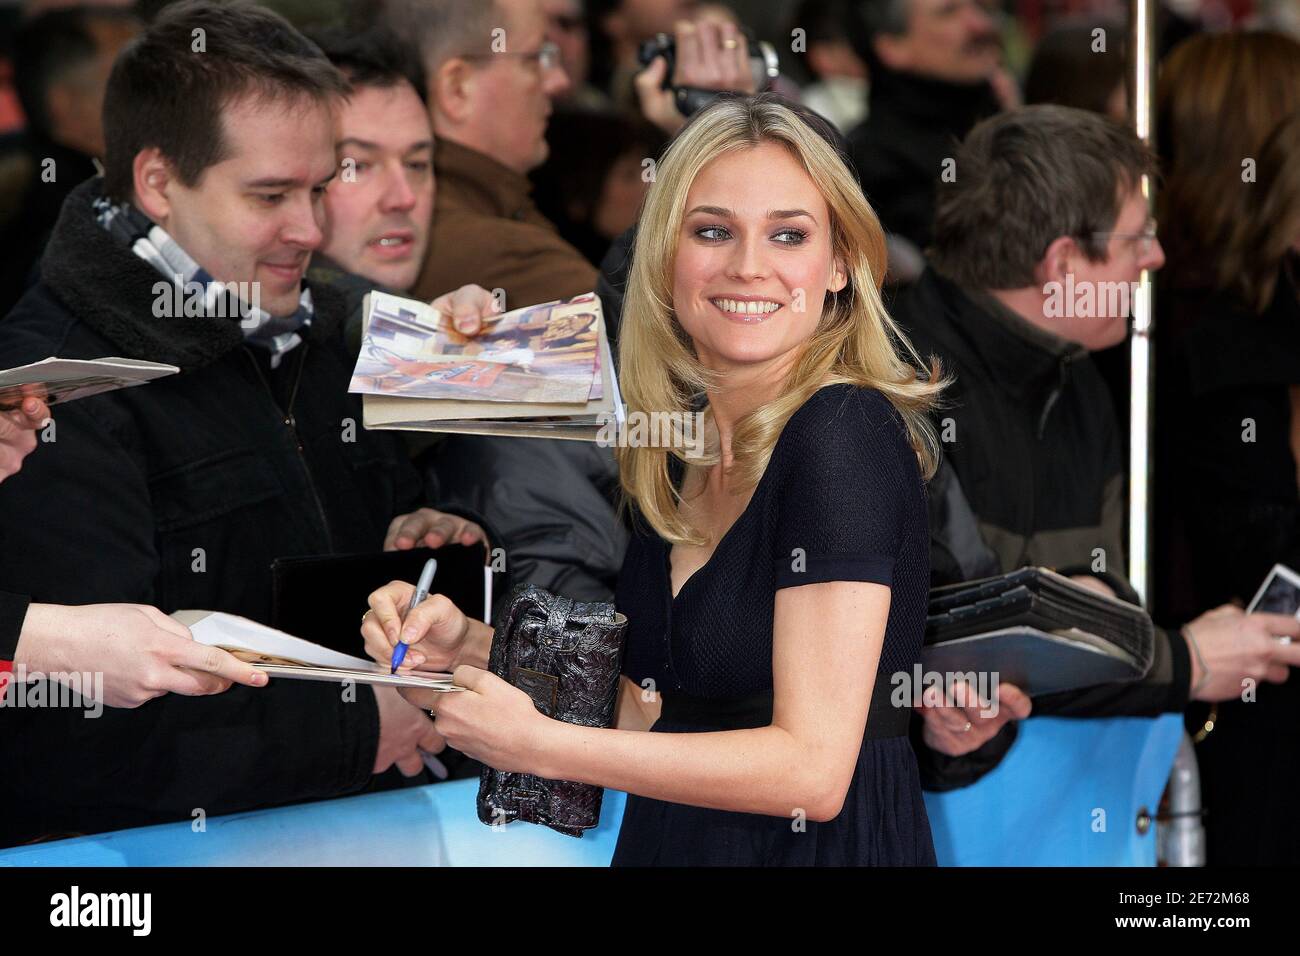 German actress Diane Kruger attends the premiere of 'Troy Director's Cut' held at the Sony Center during the 57th International Film Festival 'Berlinale' in Berlin, Germany, on February 17, 2007. Photo by Thierry Orban/ABACAPRESS.COM Stock Photo